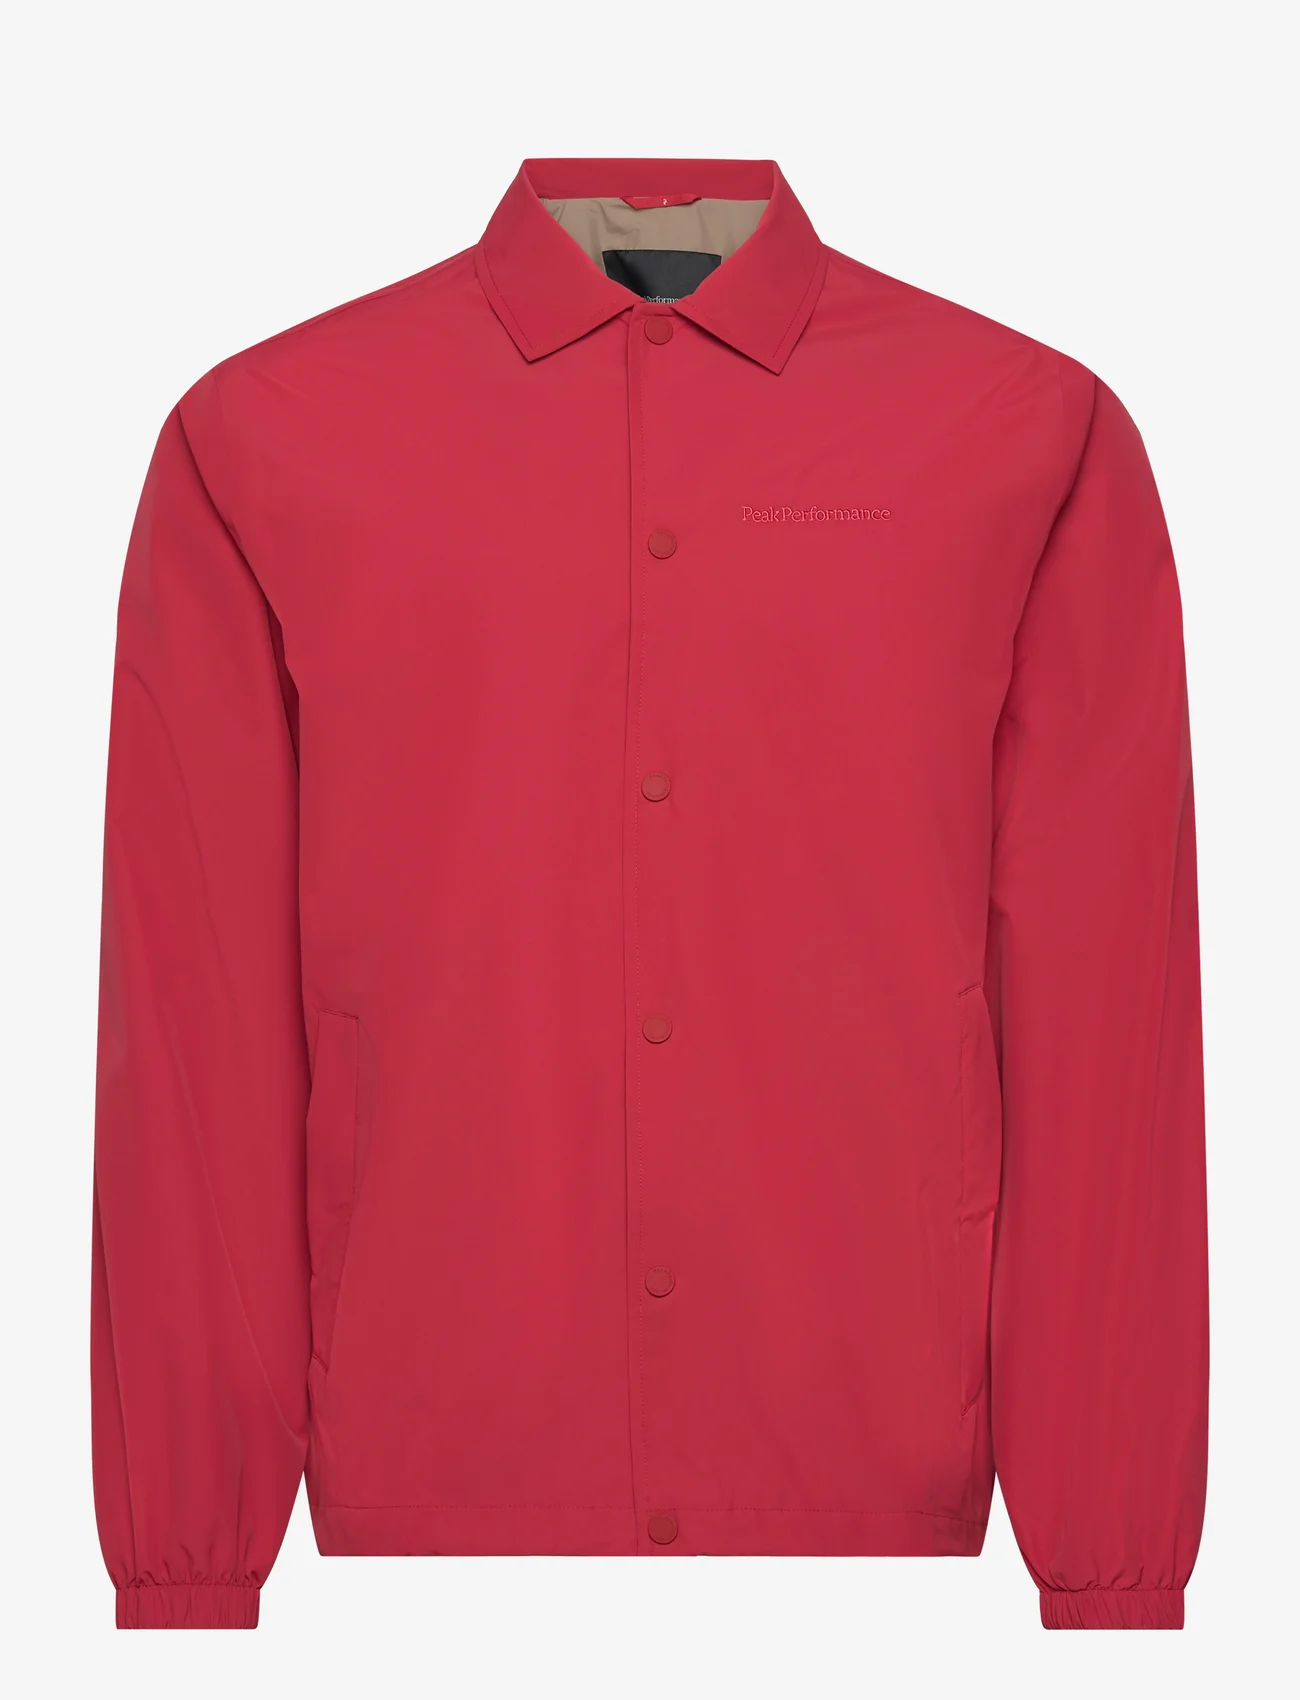 Peak Performance - M 2L Coach Jacket - spring jackets - softer red - 0